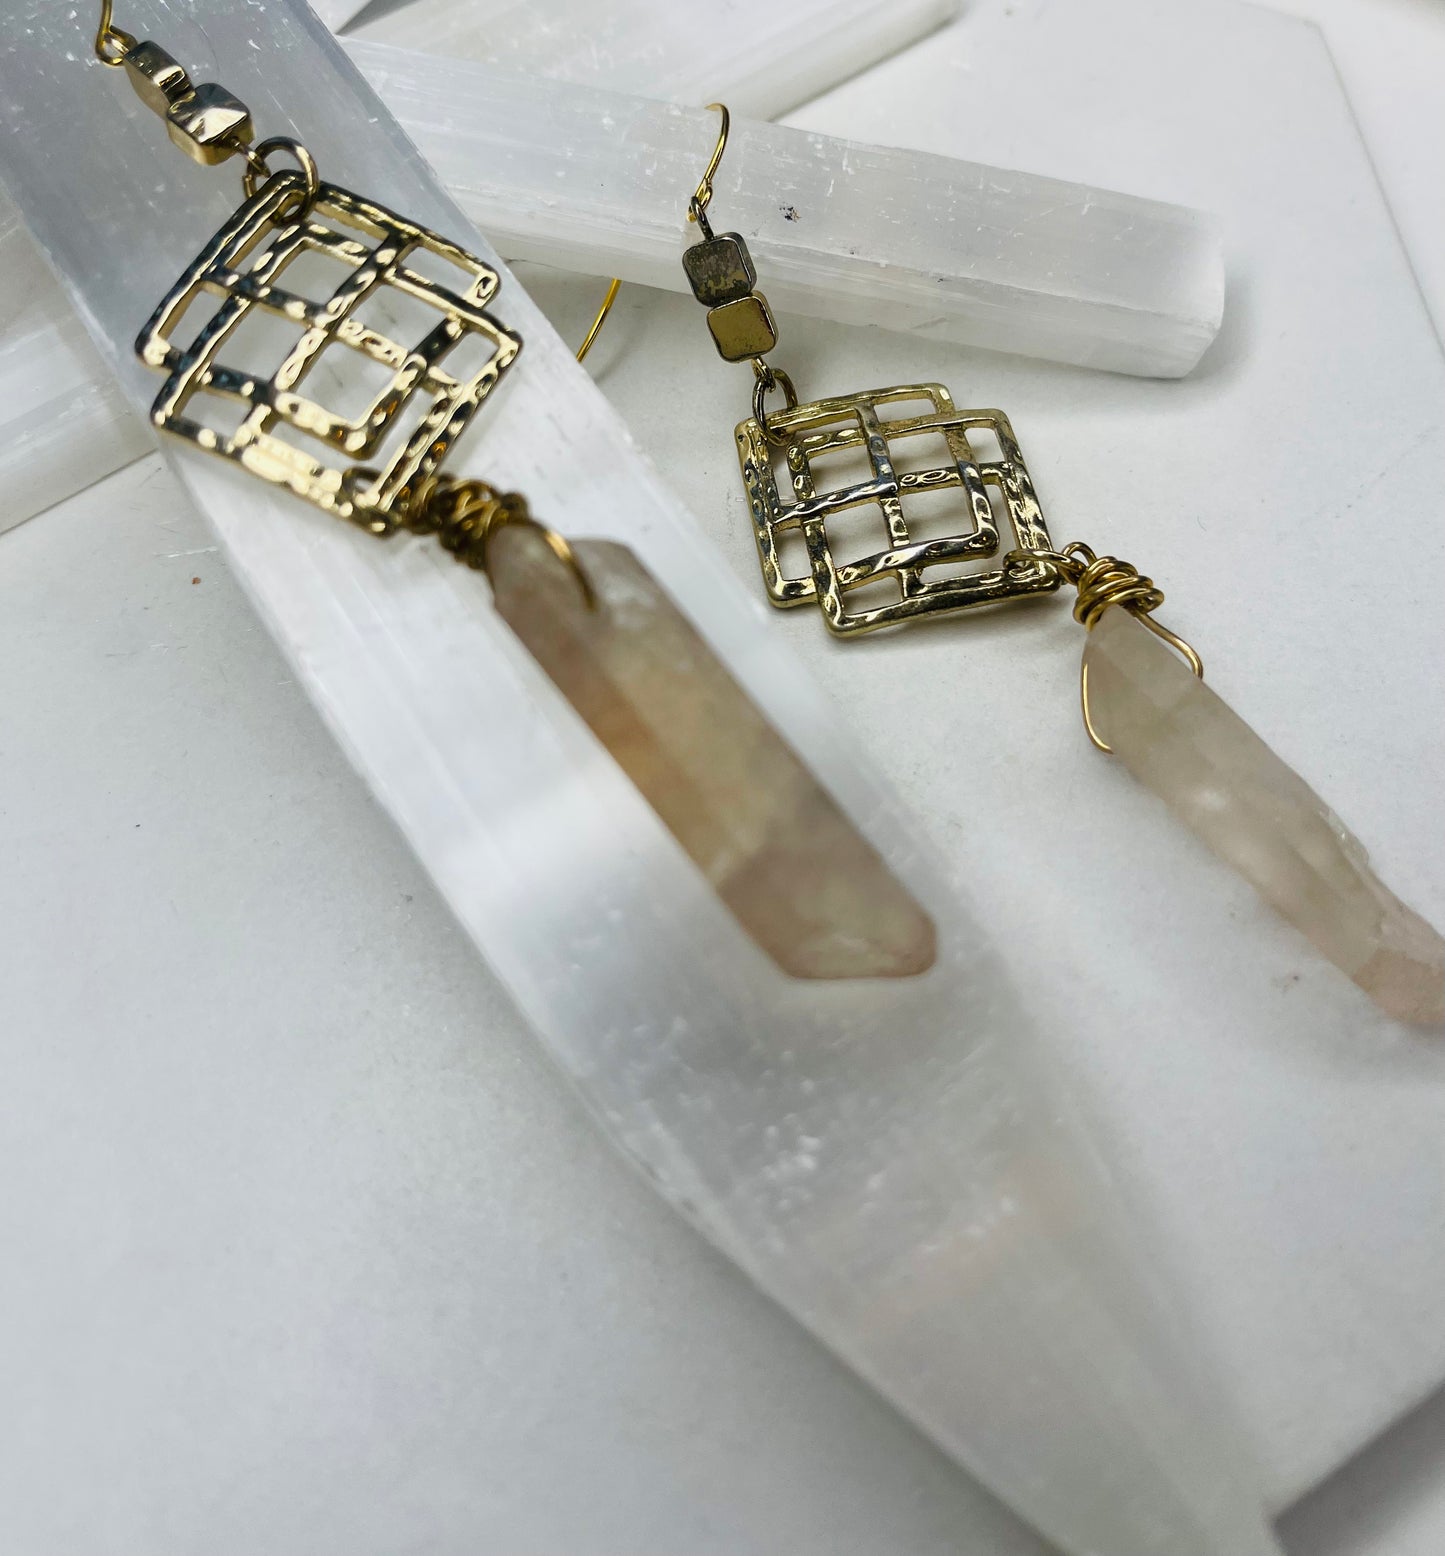 Lemurian Chakra Soul Chains Earrings w 24K Electroplated Gold Clear Quartz Crystals